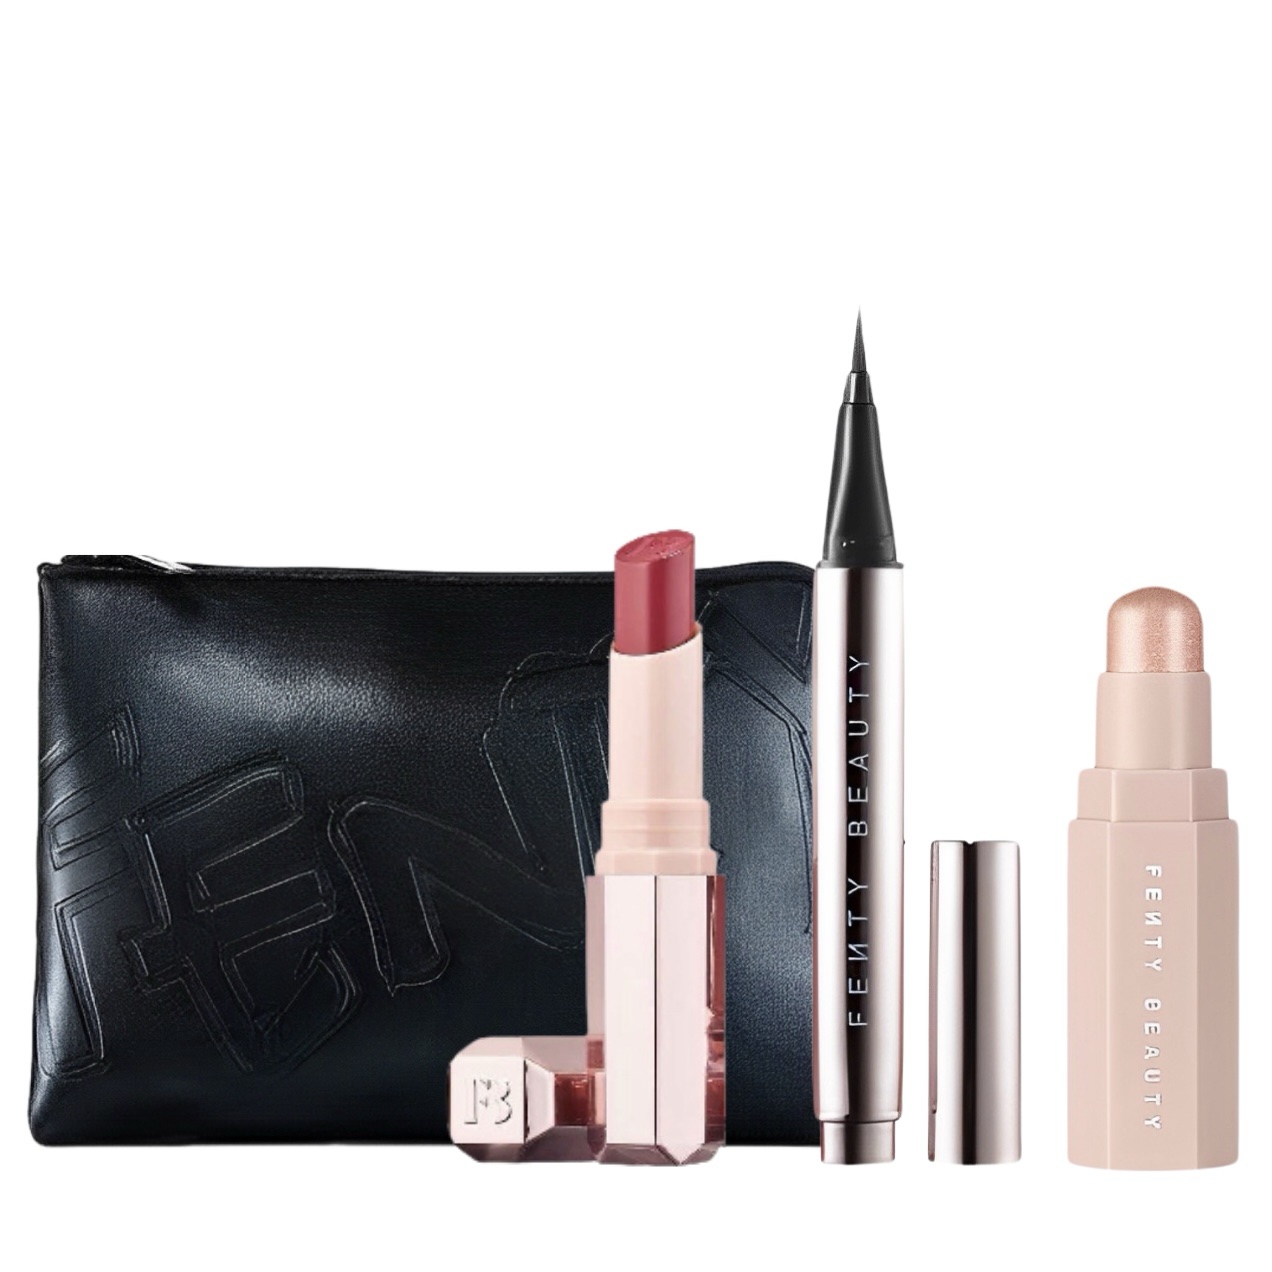 Fenty Beauty makeup products with black cosmetic bag.